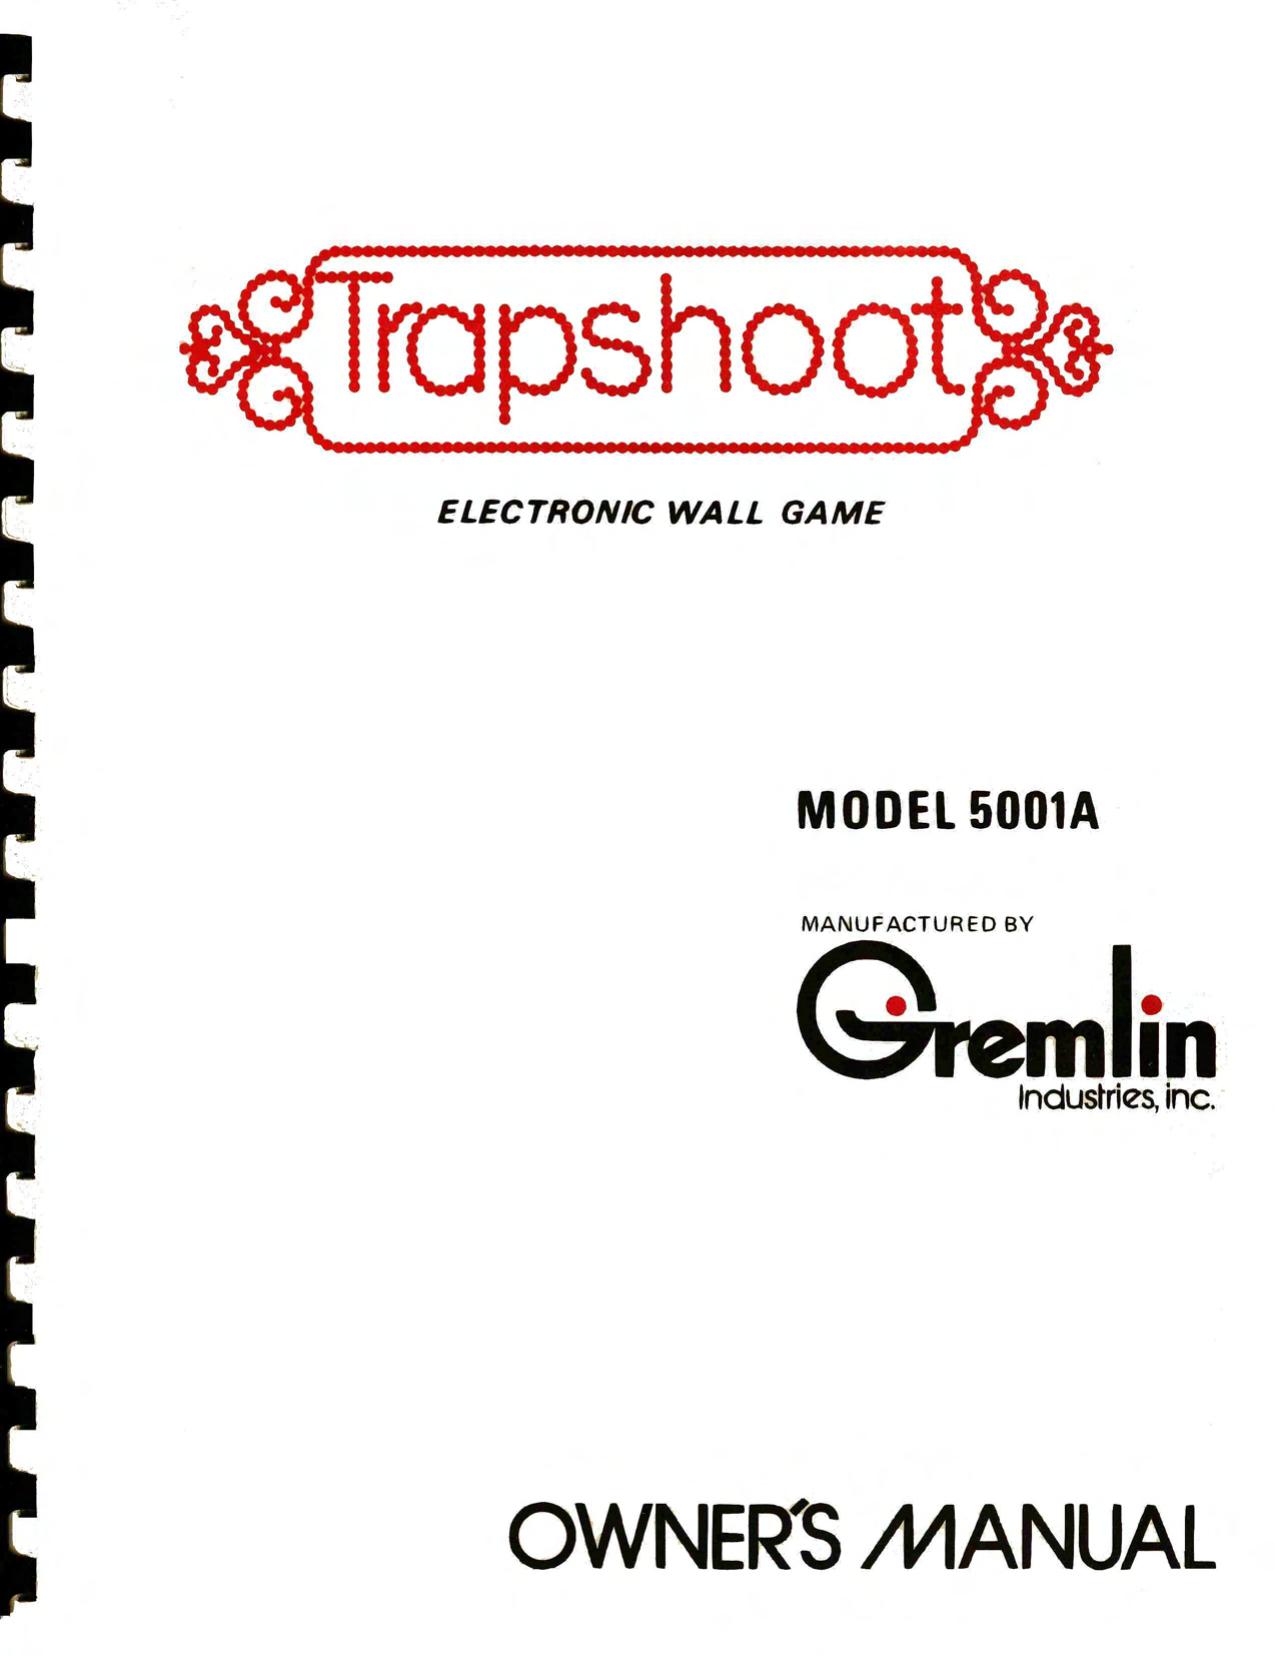 Trapshoot Electronic Wall Game Model 5001A (Revised Feb 1977)